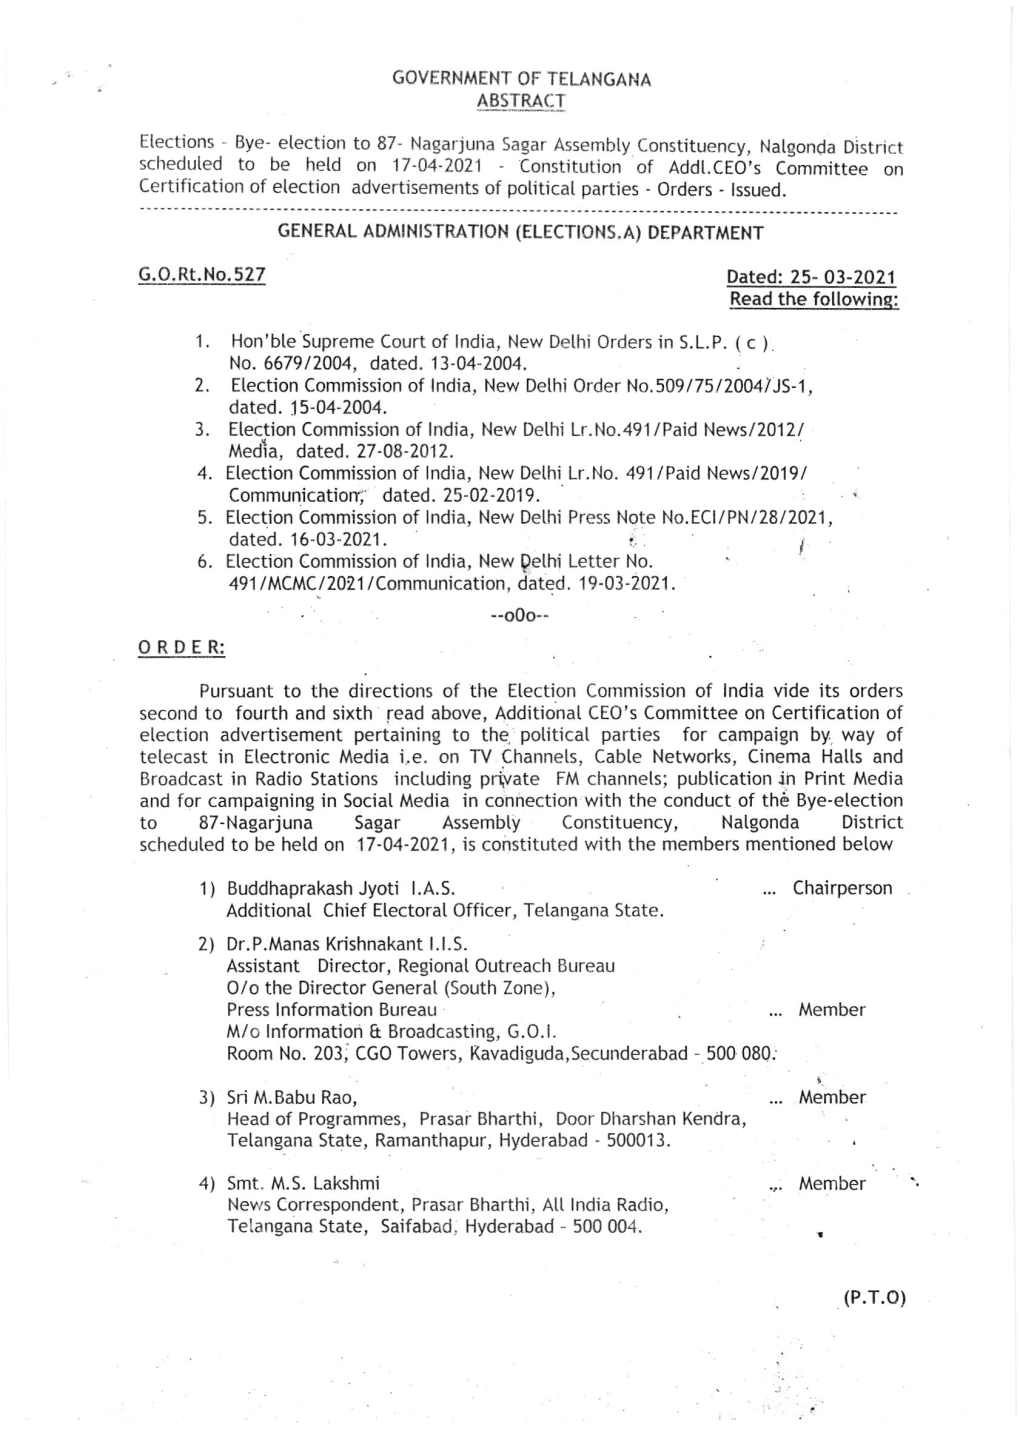 To 87-Nagarjuna Sagar Assembty Constituency, Natgonda District Scheduled to Be Hetd on 17 -04-2021 , Is Constituted with the Members Mentioned Below